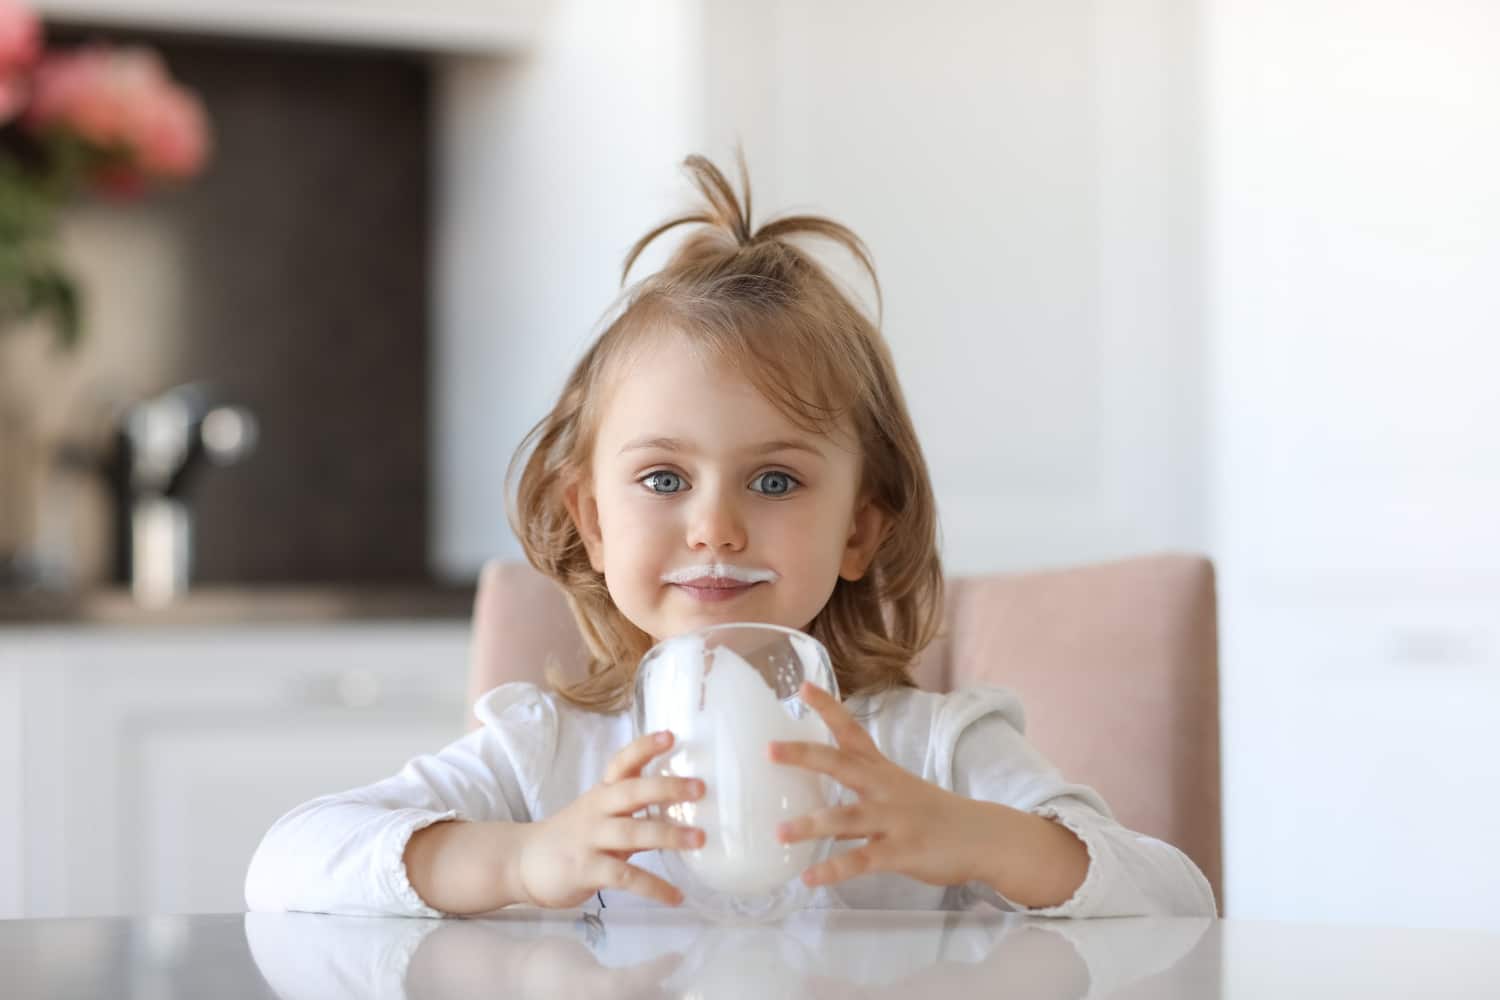 Blond cute child with blue eyes with traces of milk on the lips is holding a glass of milk siting at a white table in kitchen